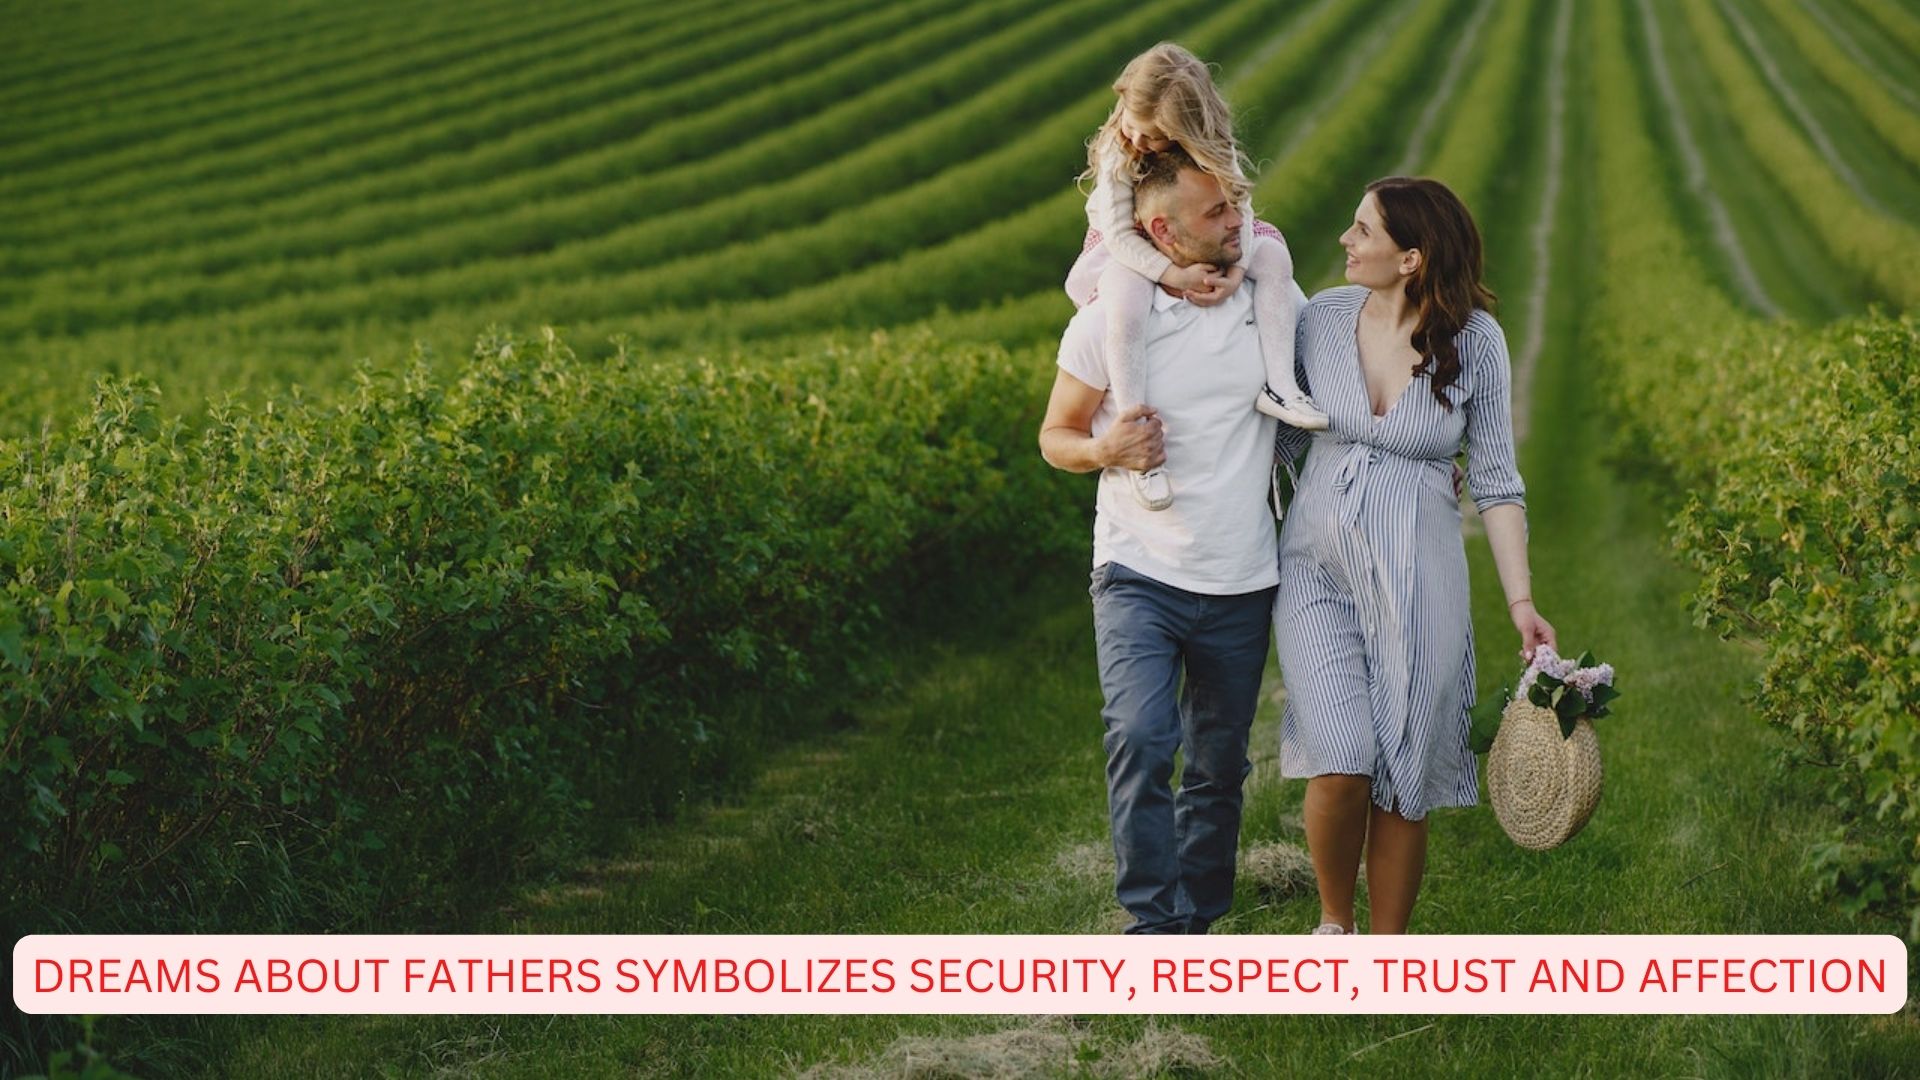 Dreams About Fathers - Symbolizes Security, Respect, Trust, And Affection